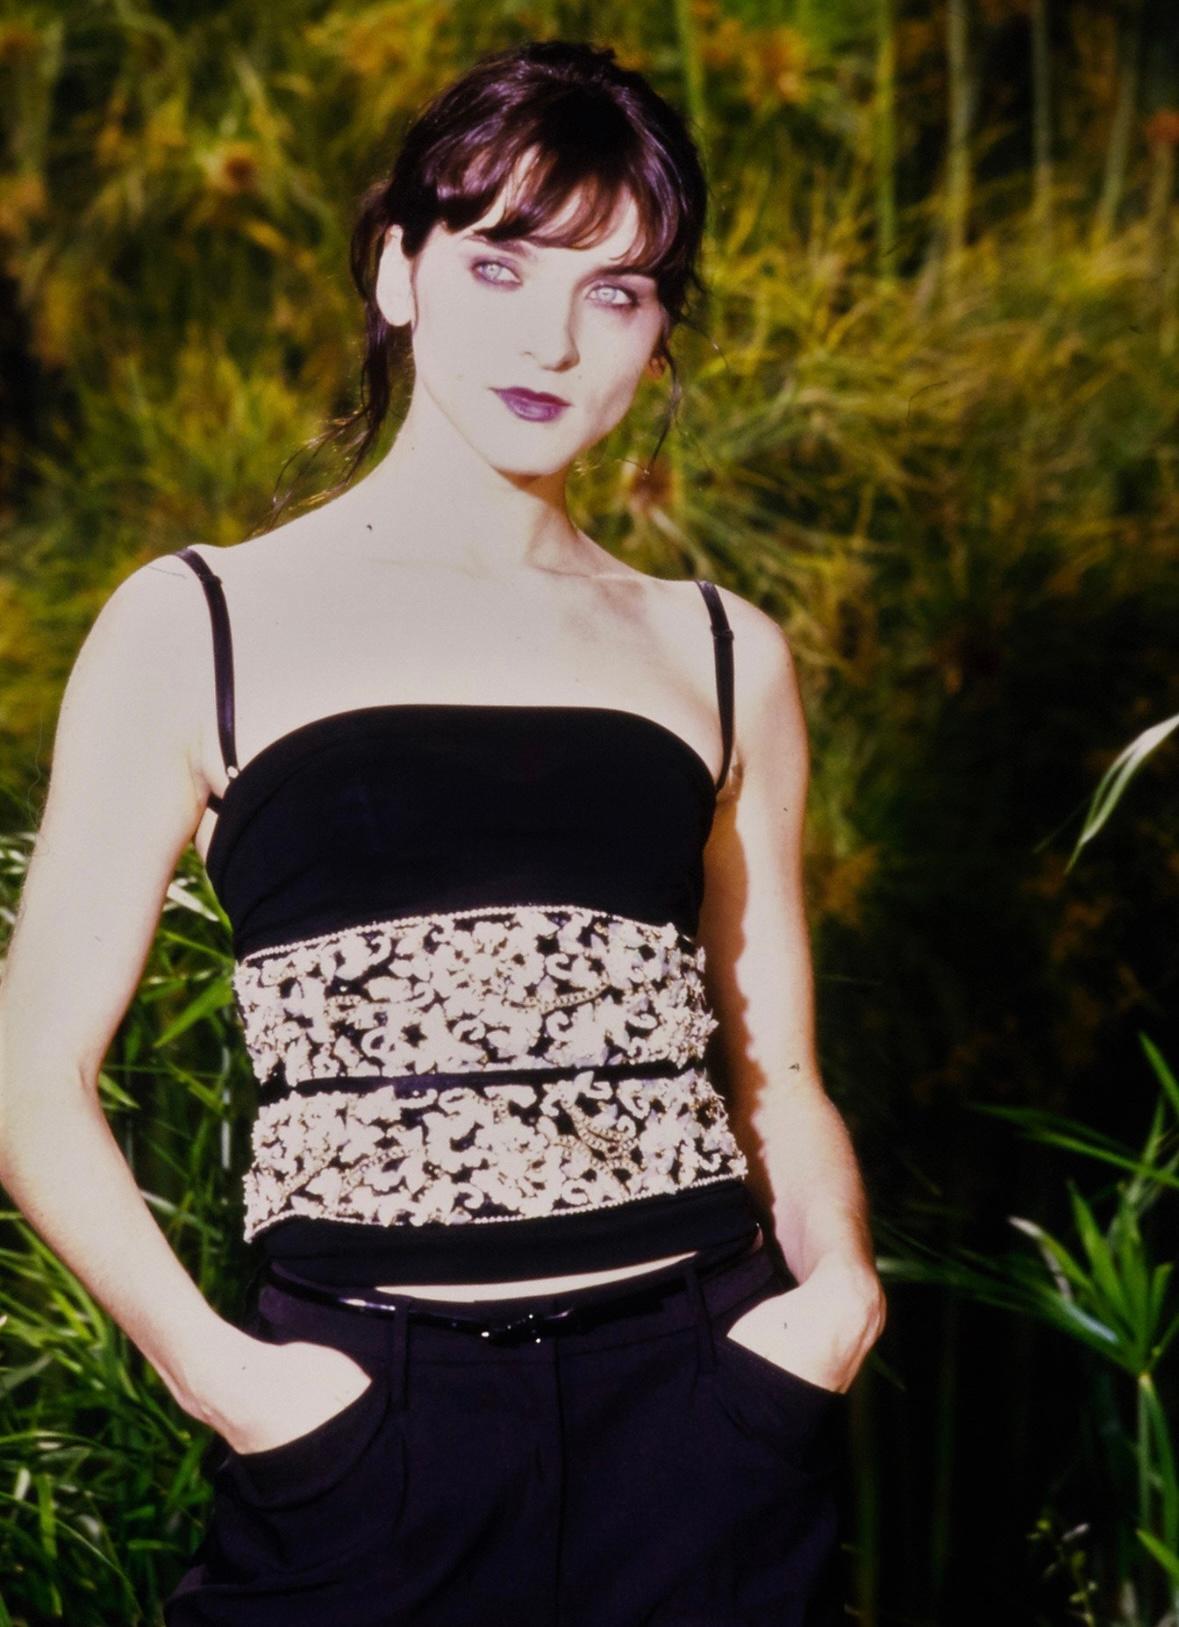 Presenting a fabulous black floral Dolce & Gabbana waist belt. From the Spring/Summer 1999 collection, this intricate waist belt debuted on the season's runway as part of look 45, modeled by Michele Hicks. This wide belt/corset features a black wrap